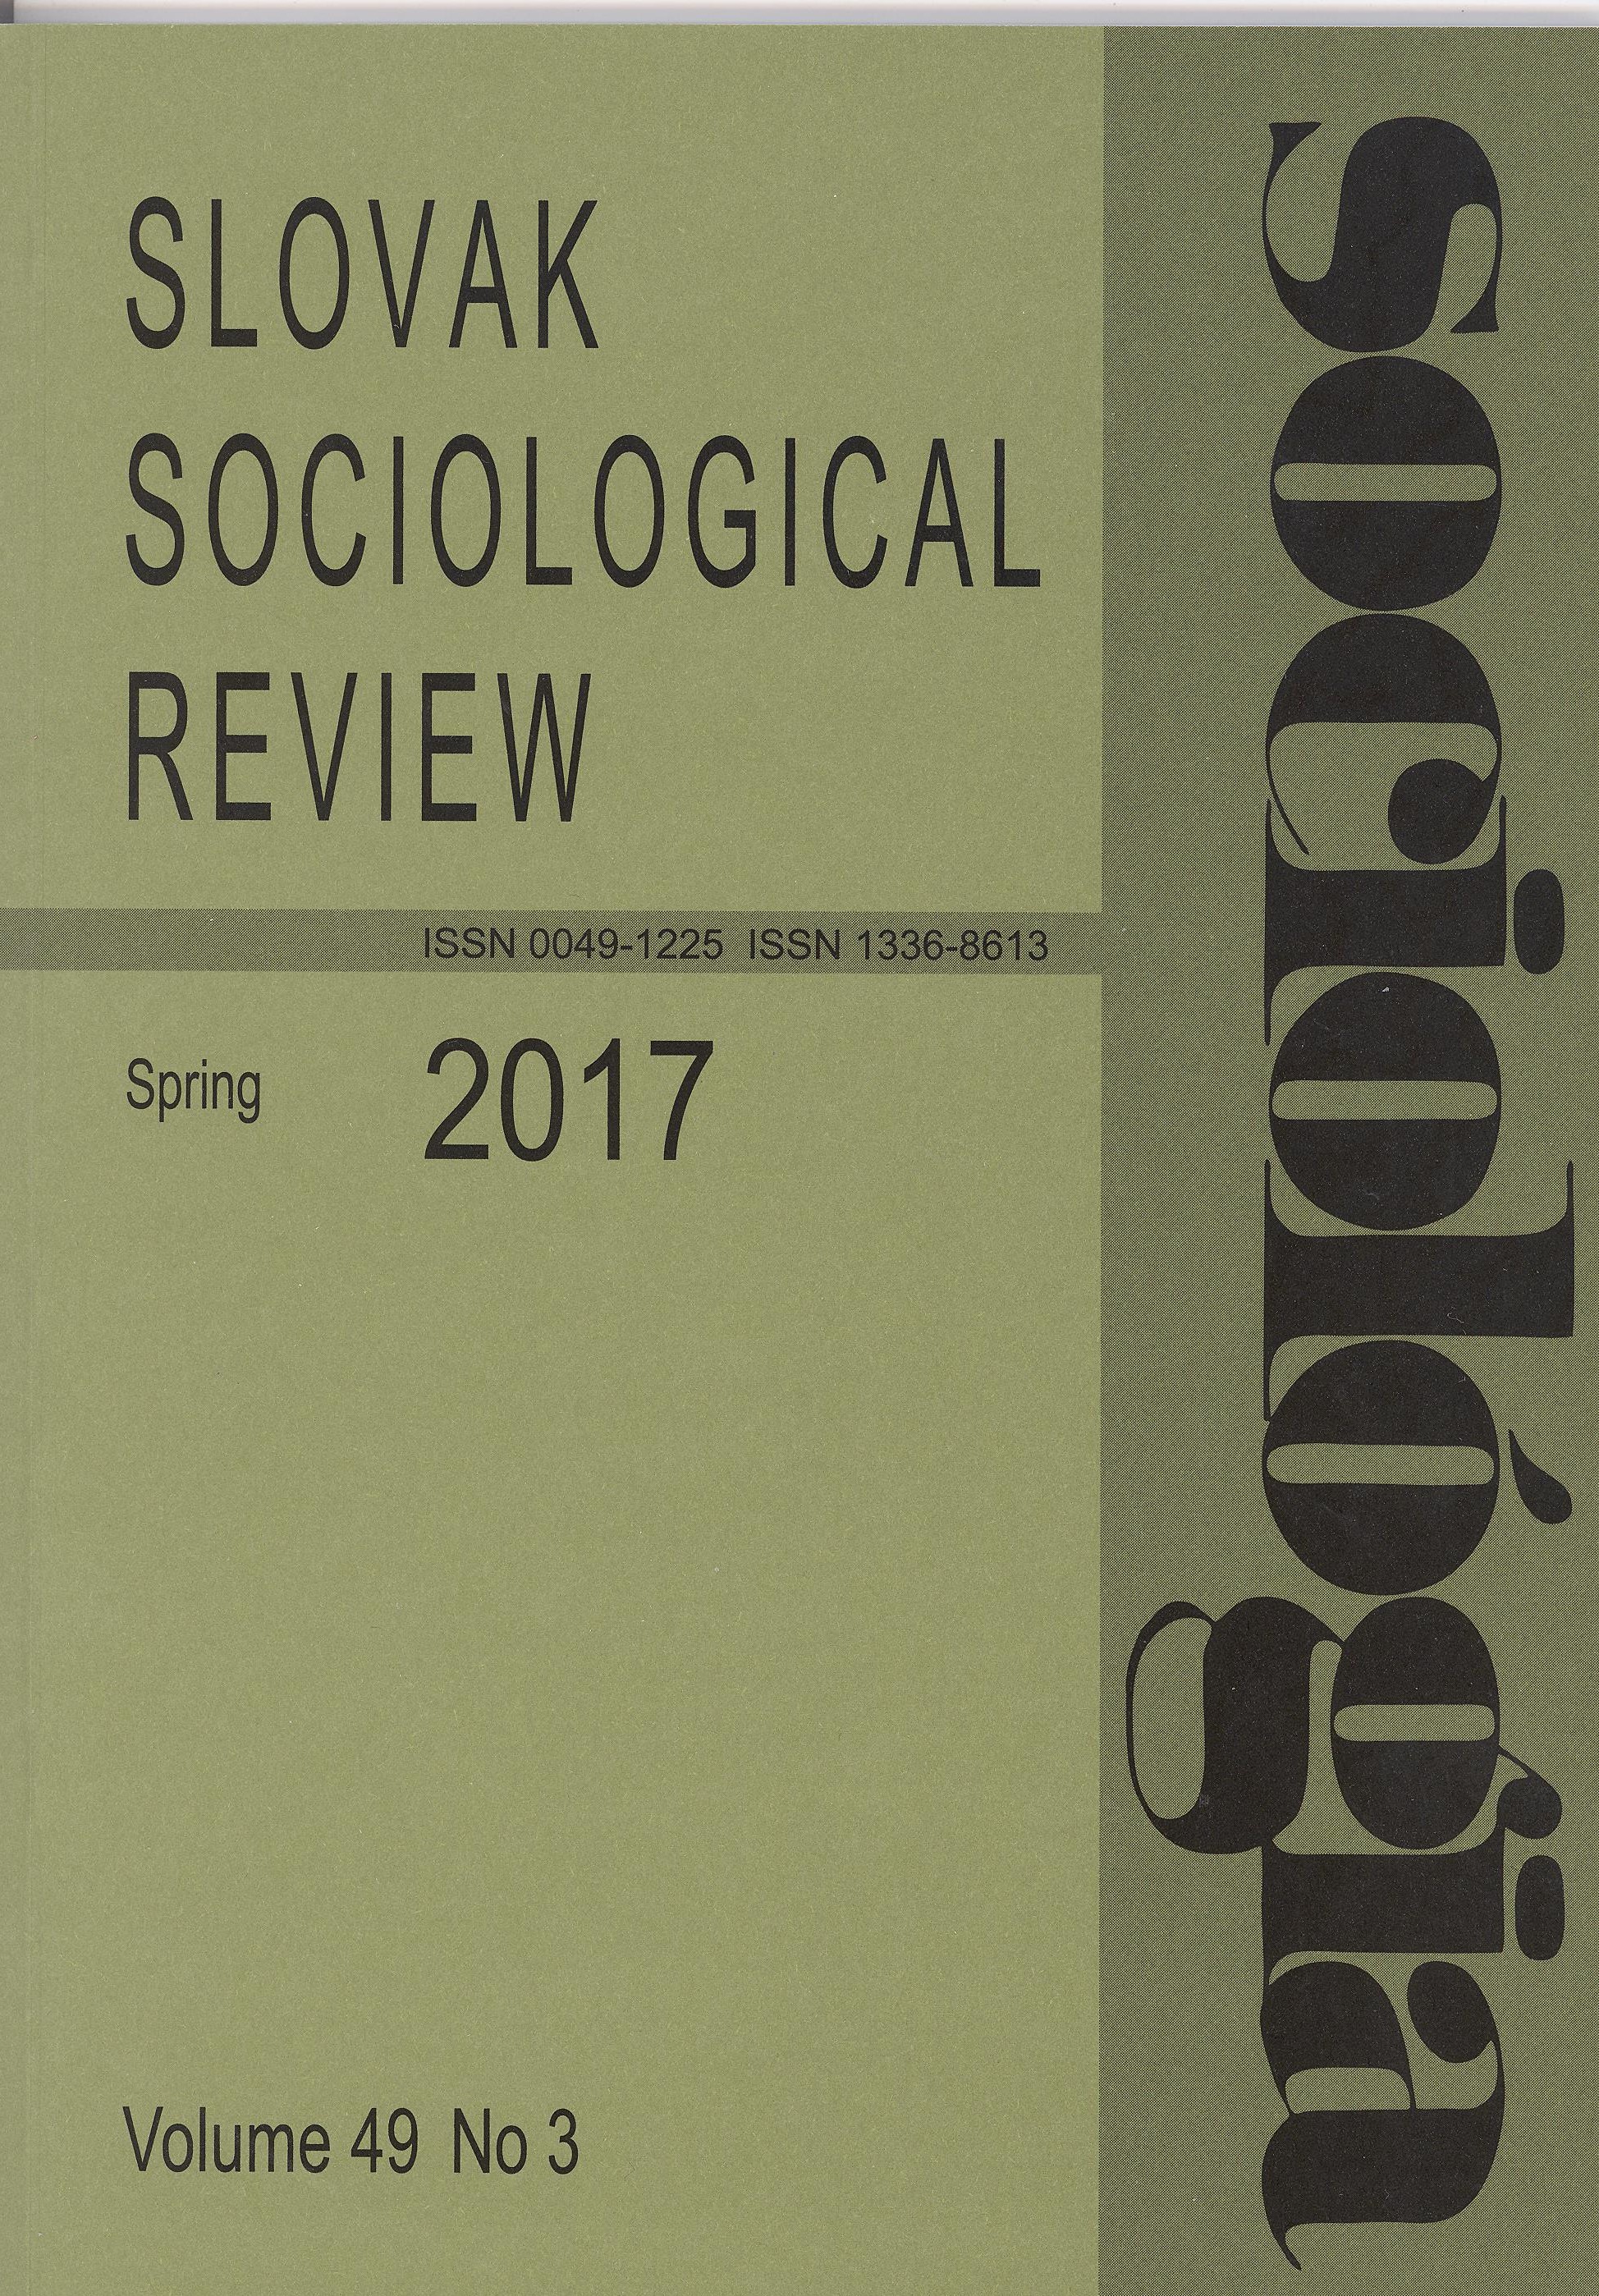 Causal Analytic Methods in Sociology: A Comparison of the Simon-Blalock Method and the Methods of Durkheim’s Le Suicide Cover Image